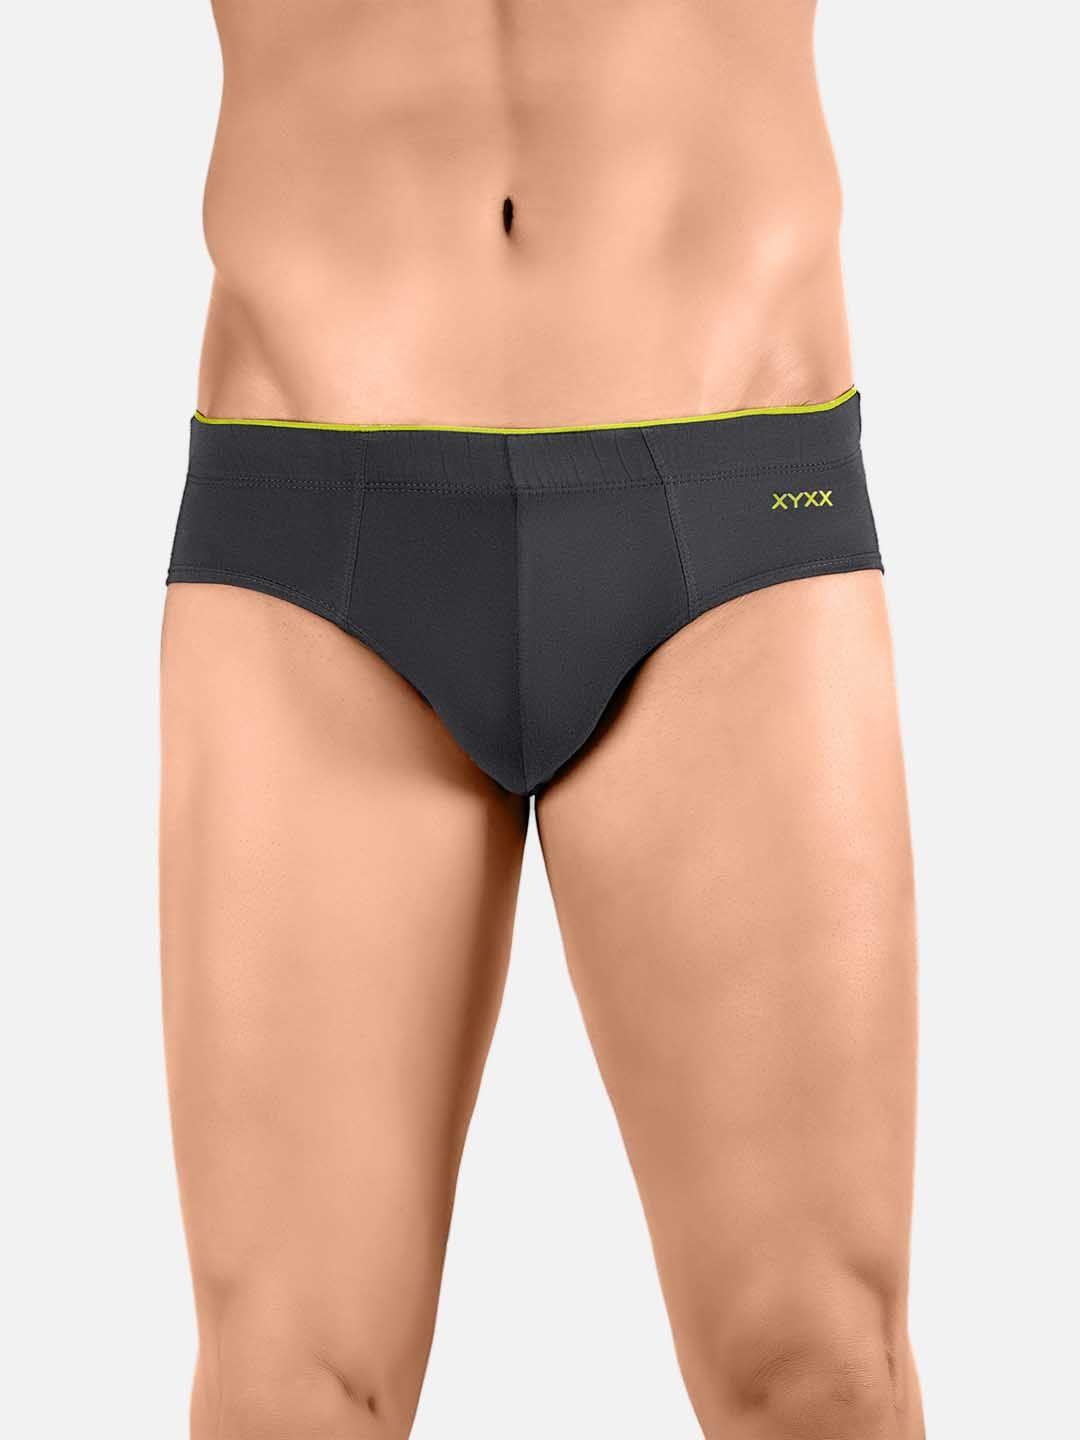 xyxx-men-charcoal-grey-solid-antimicrobial-basic-briefs-xybrf53